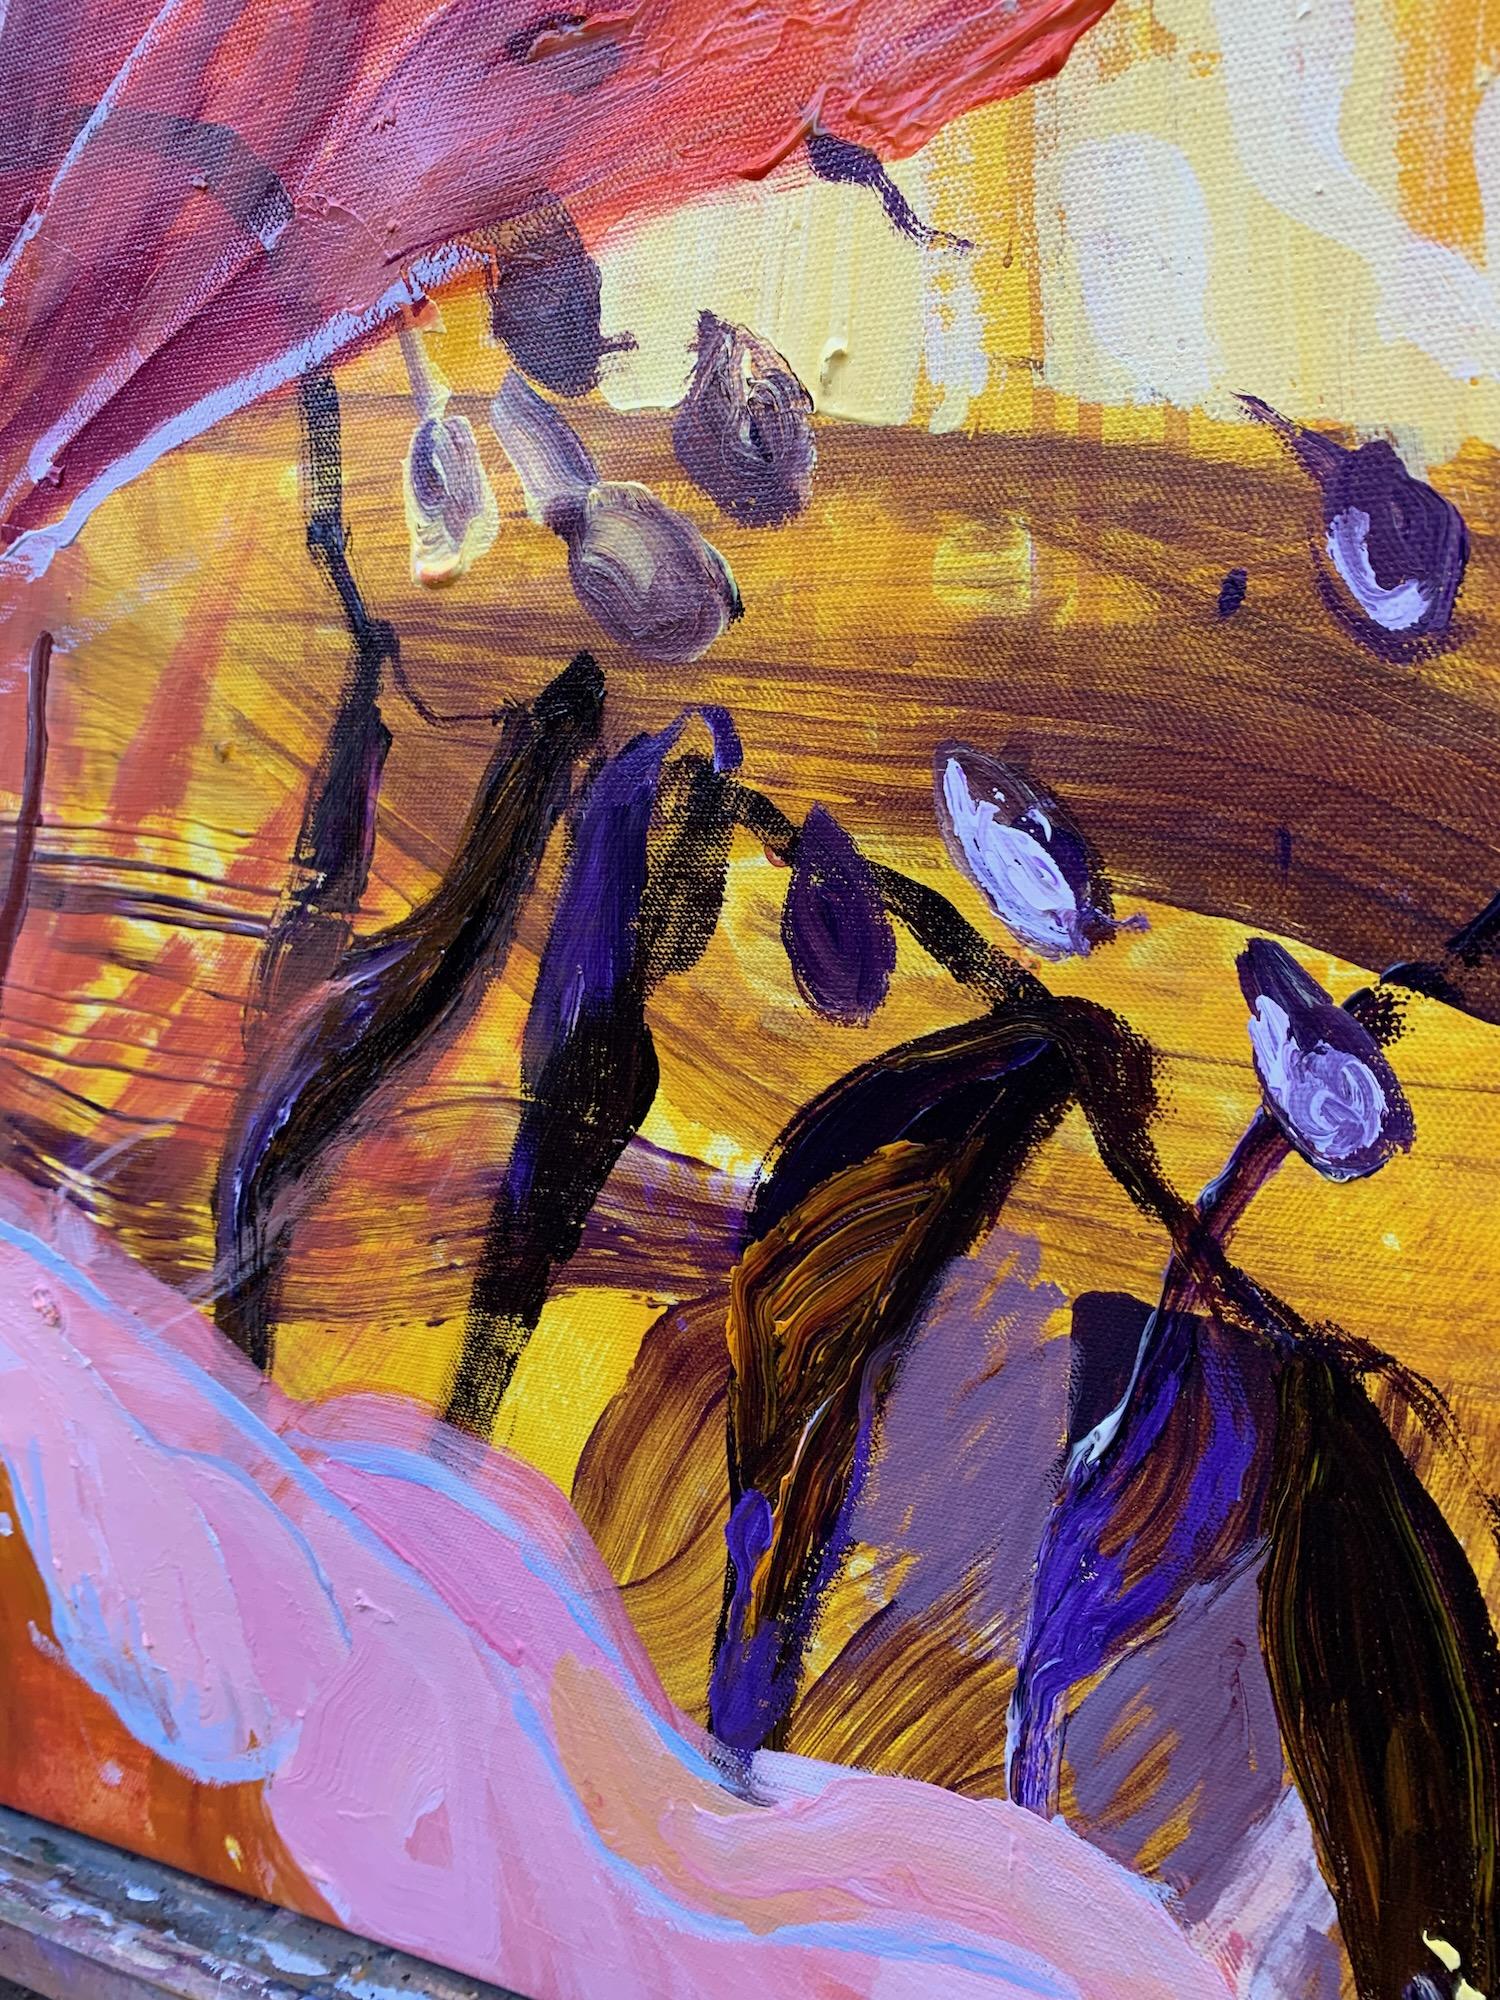 <p>Artist Comments<br>A blooming cascade of florals in shades of pink, purple, yellow, and red by artist Julia Hacker. Using acrylic paint applied in various textures, Julia creates an abstract inspired by a particularly sunny morning in the garden.